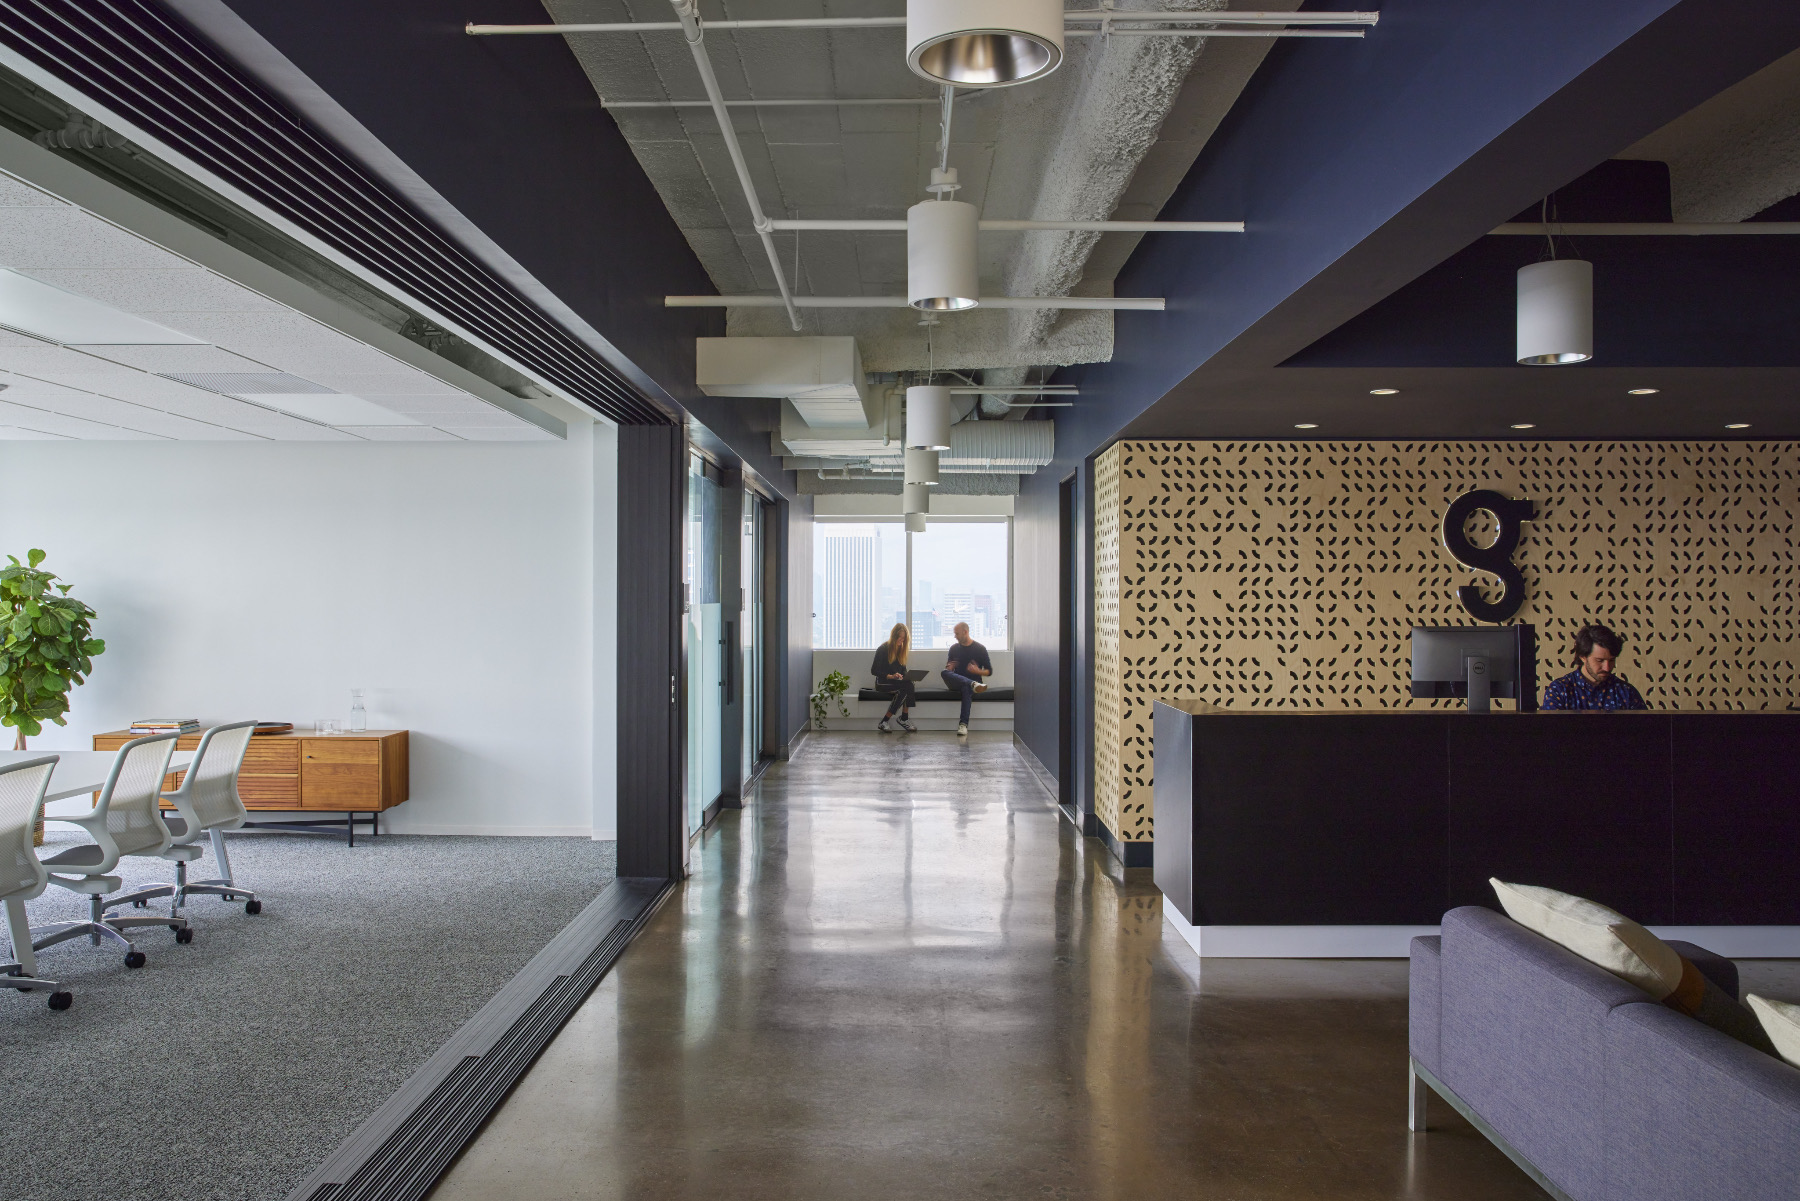 A Tour of gNet’s New Los Angeles Office